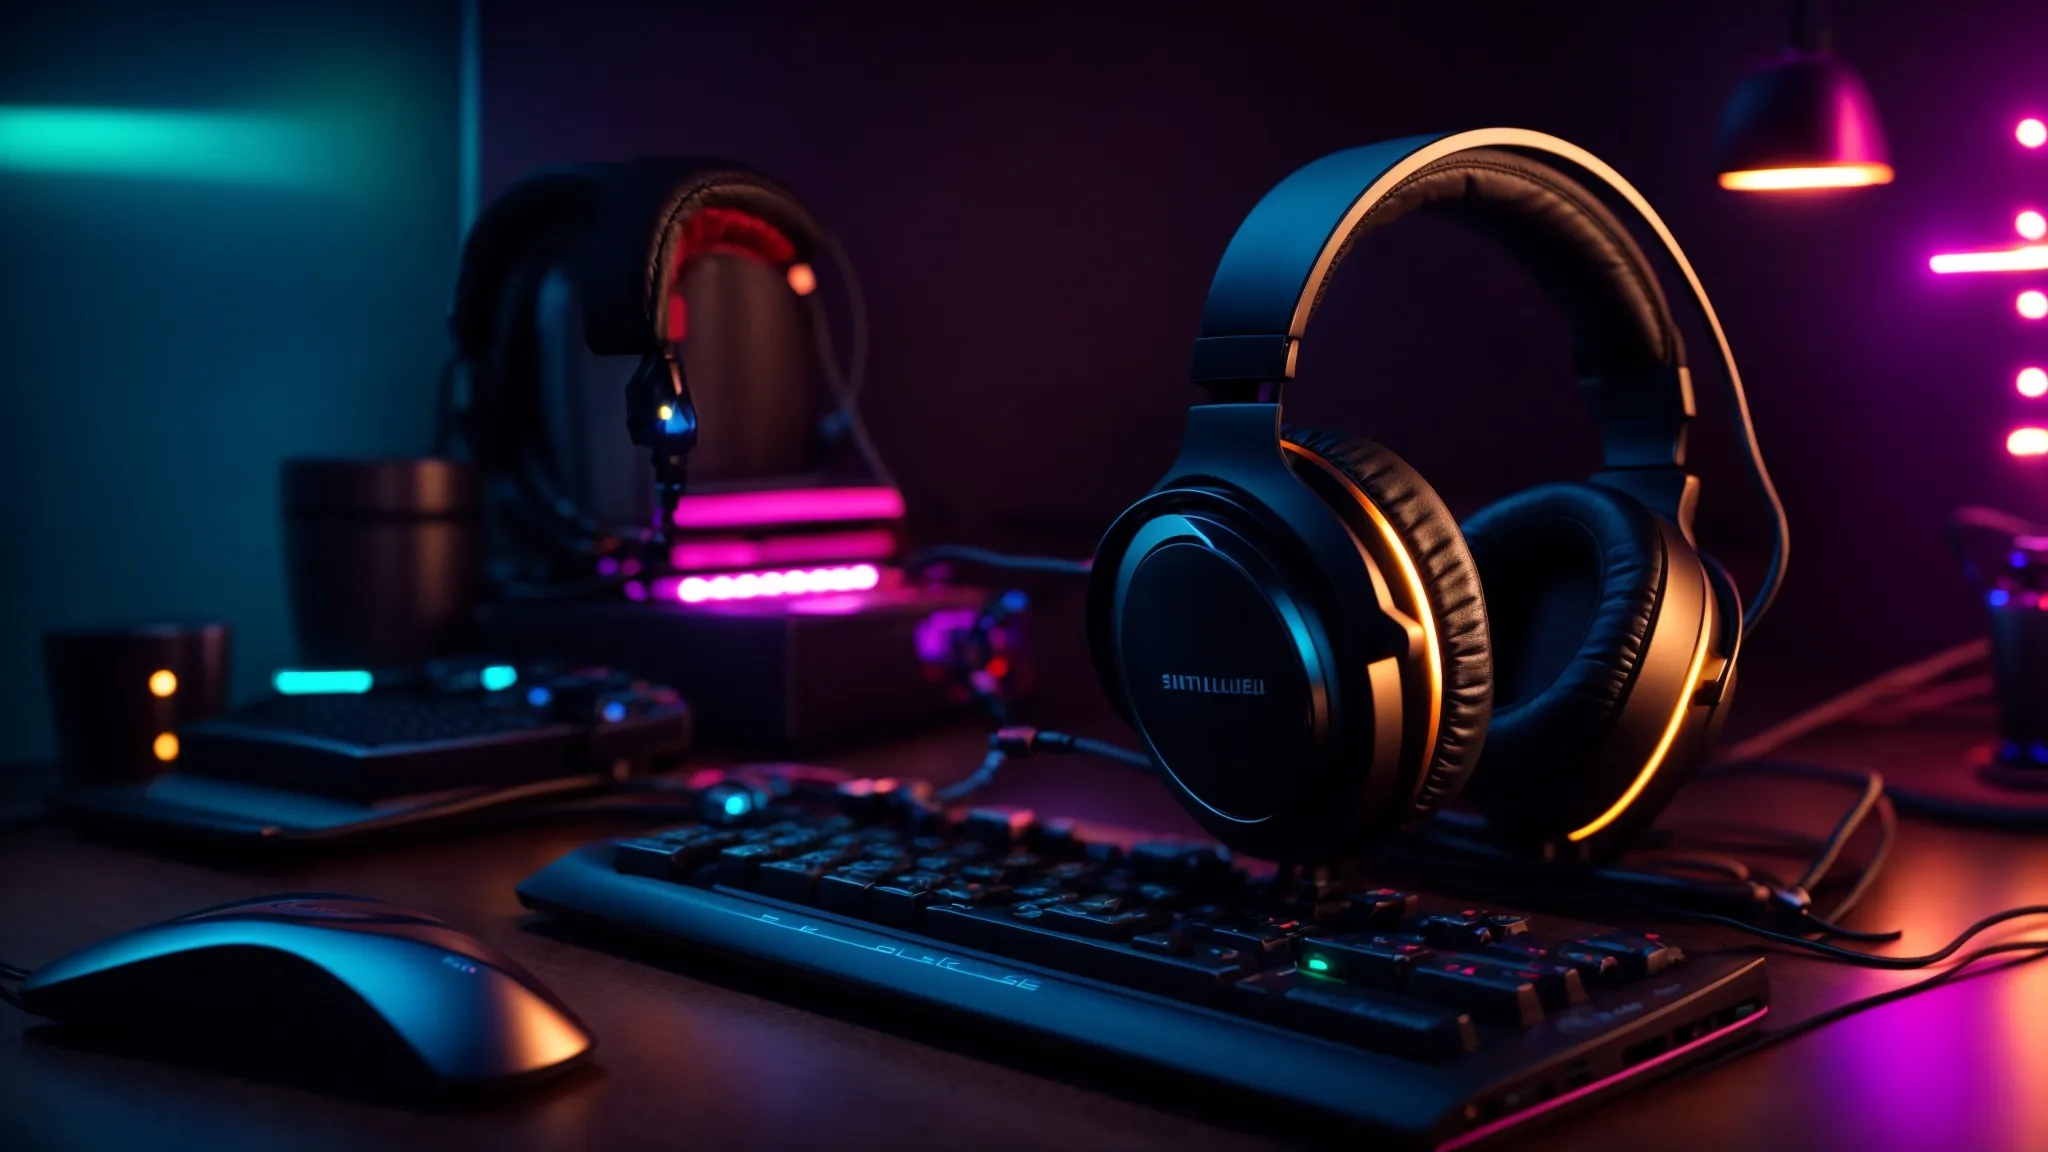 a sleek, metal gaming headset rests on a desk beside a gaming keyboard, under the soft glow of rgb lights.